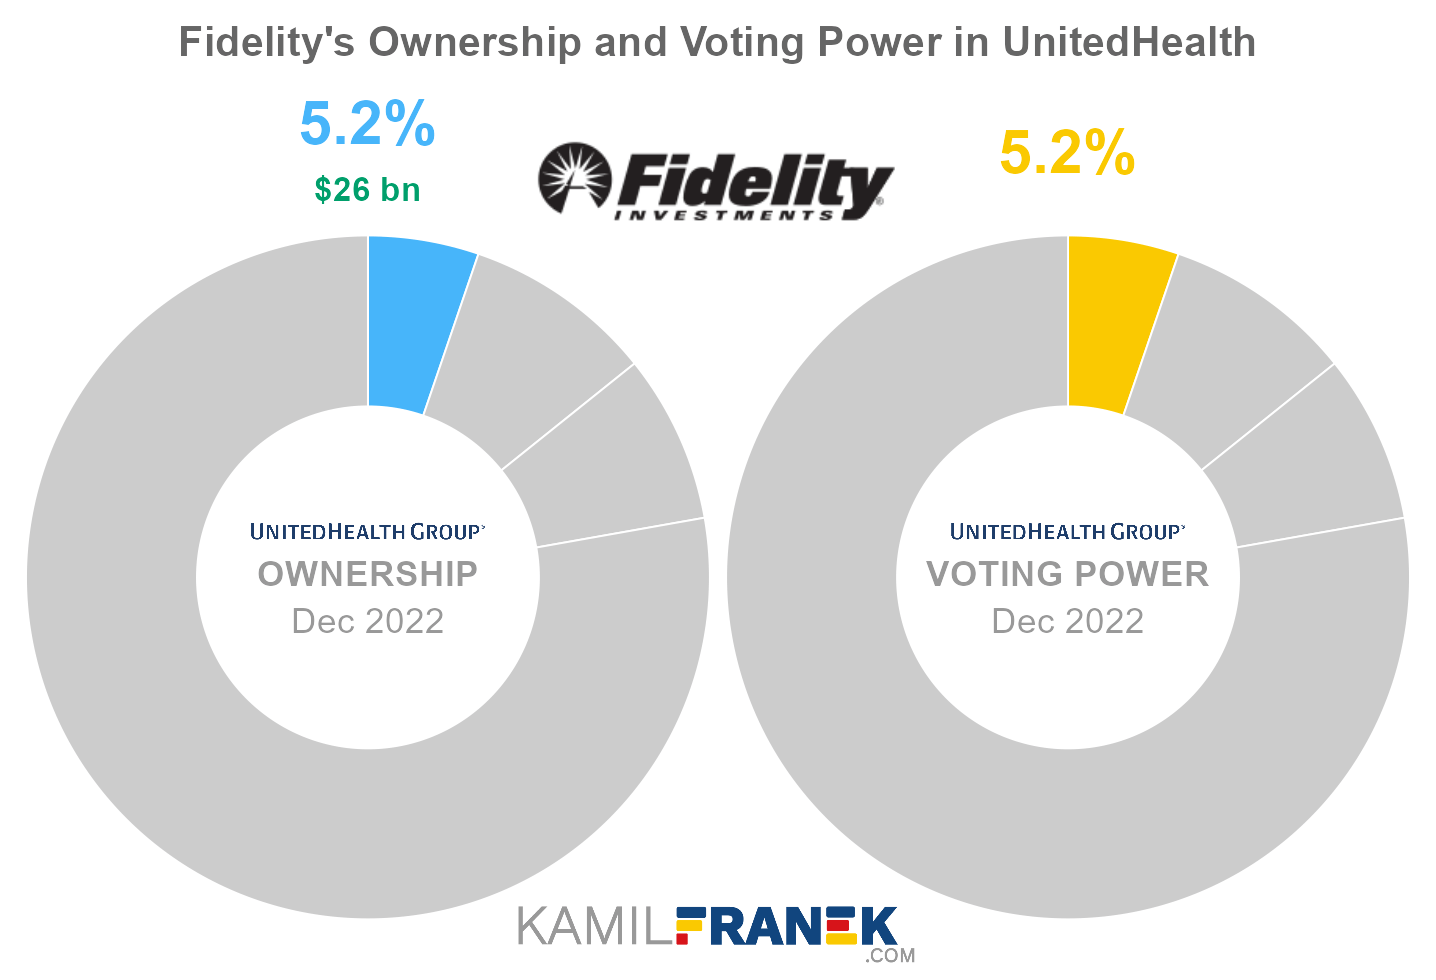 Fidelity's share ownership and voting power in UnitedHealth (chart)